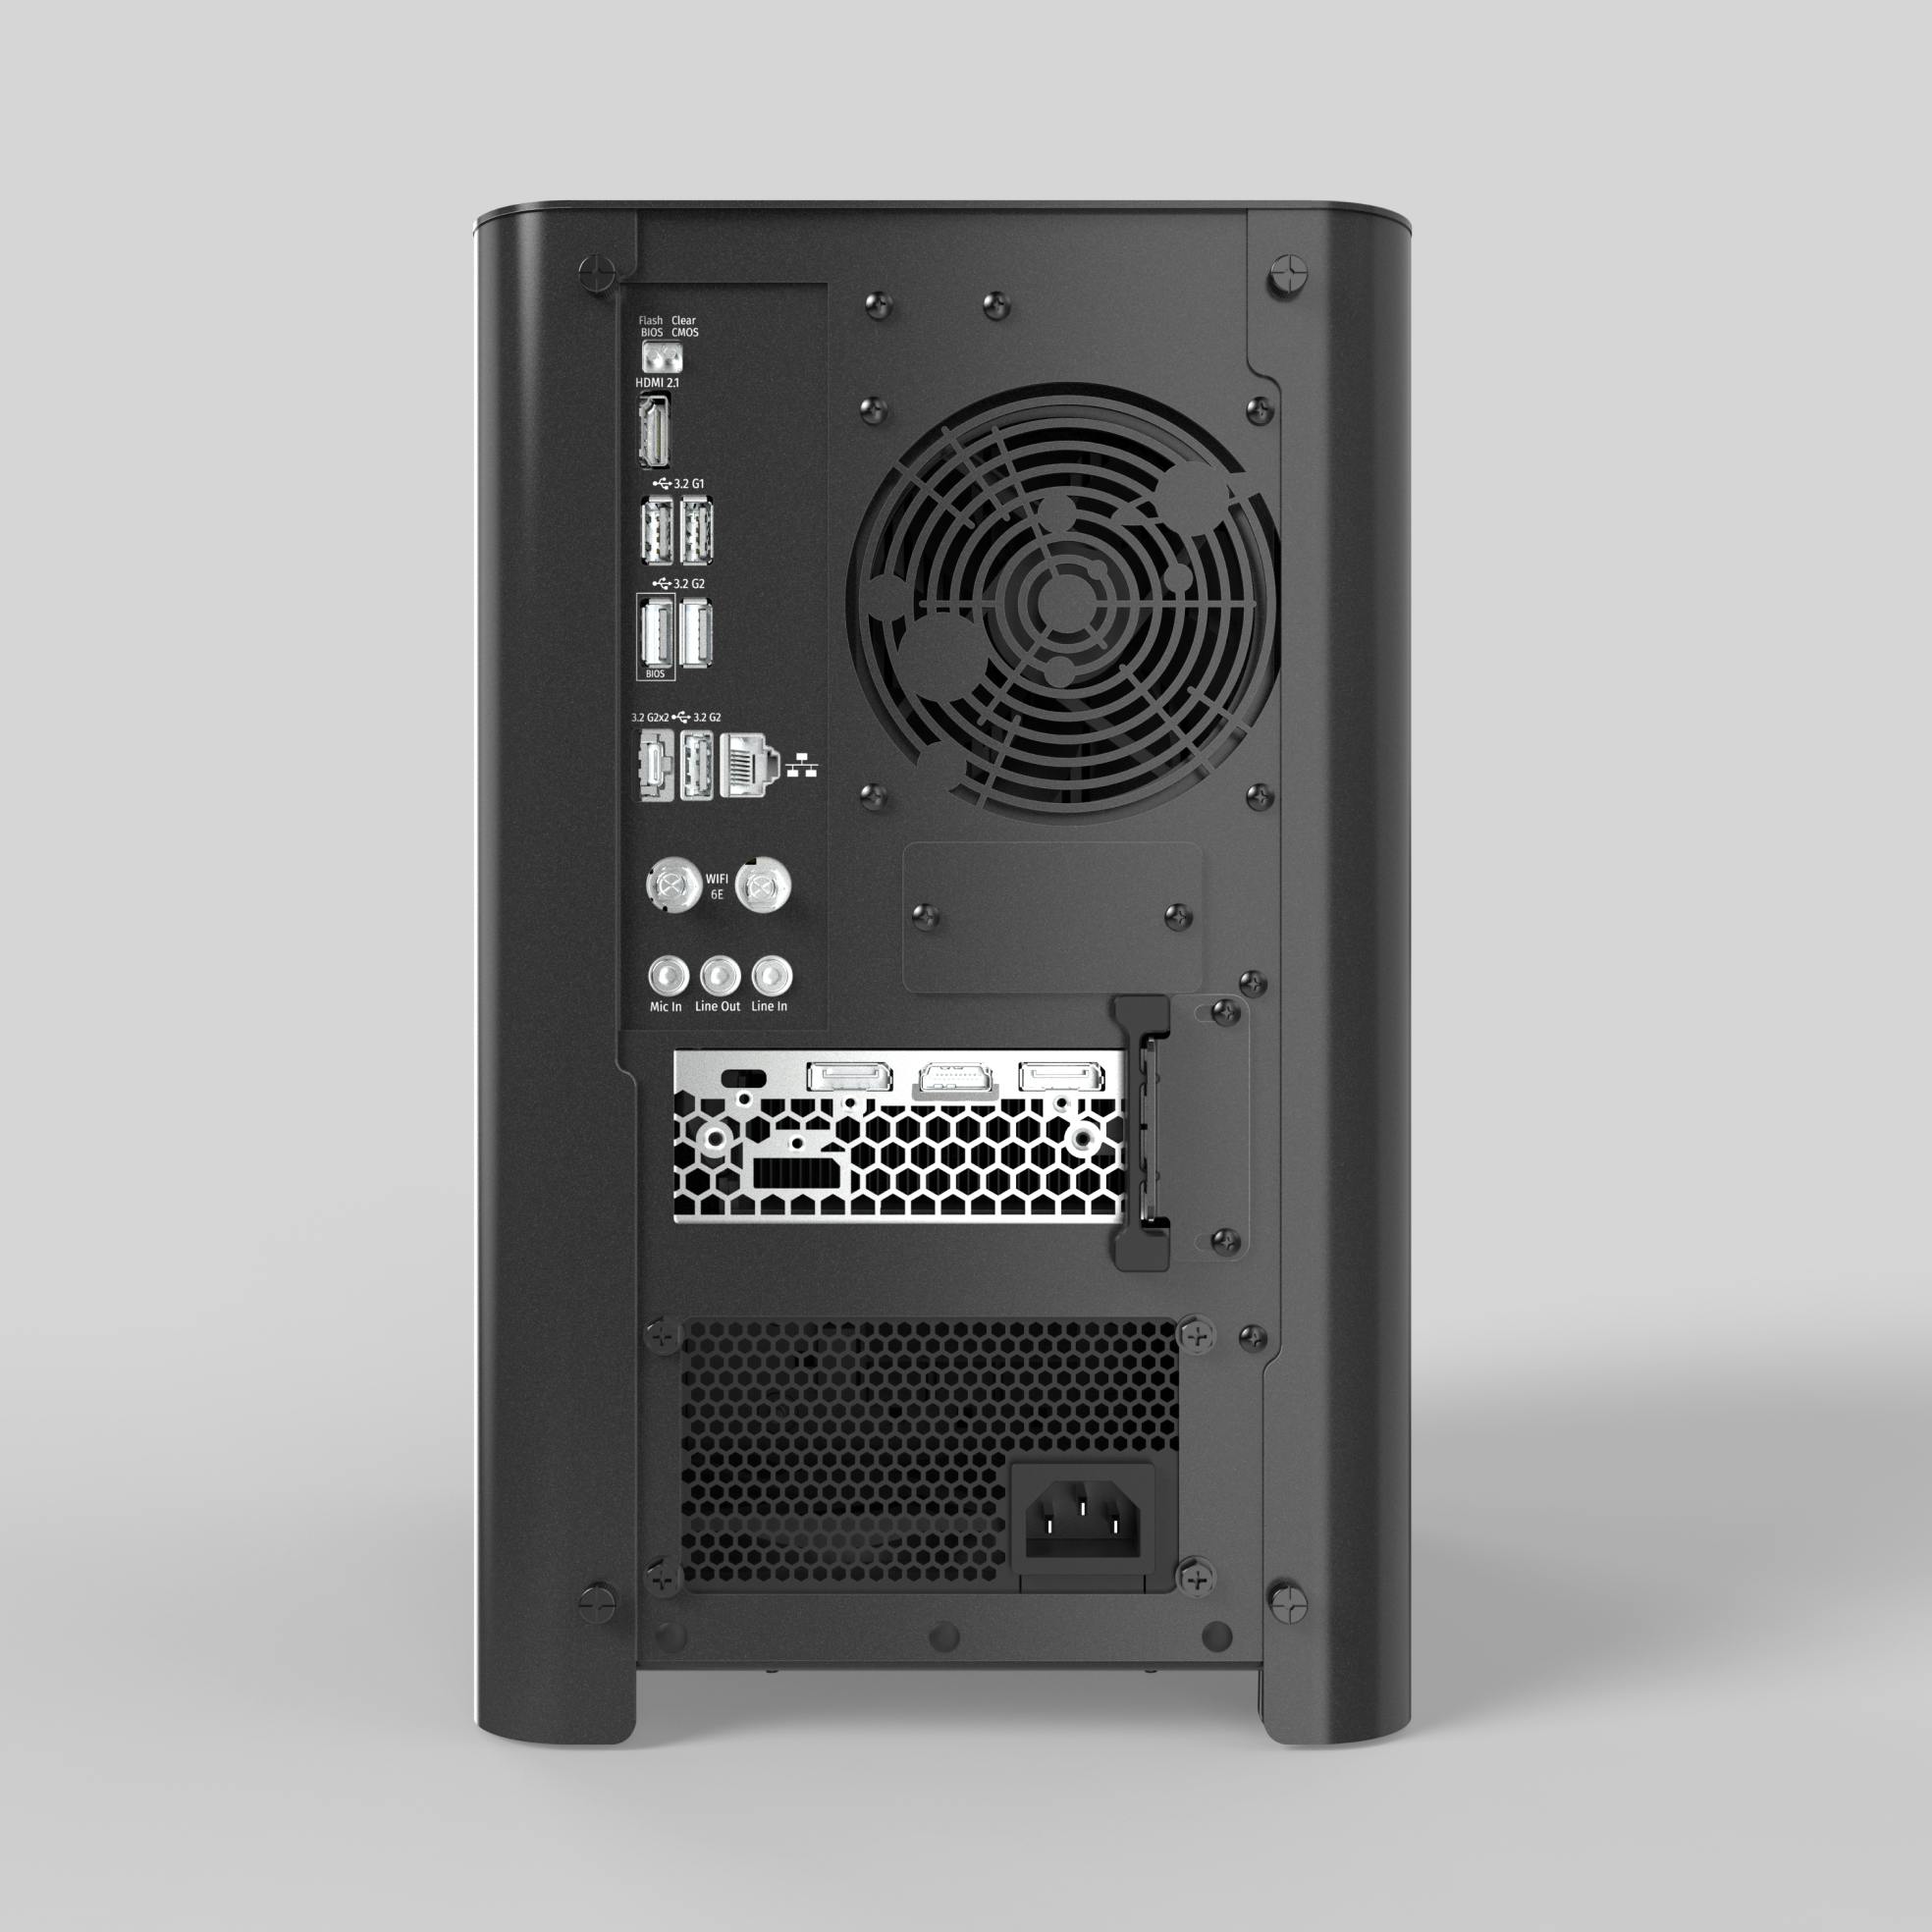 Back panel of Thelio computer